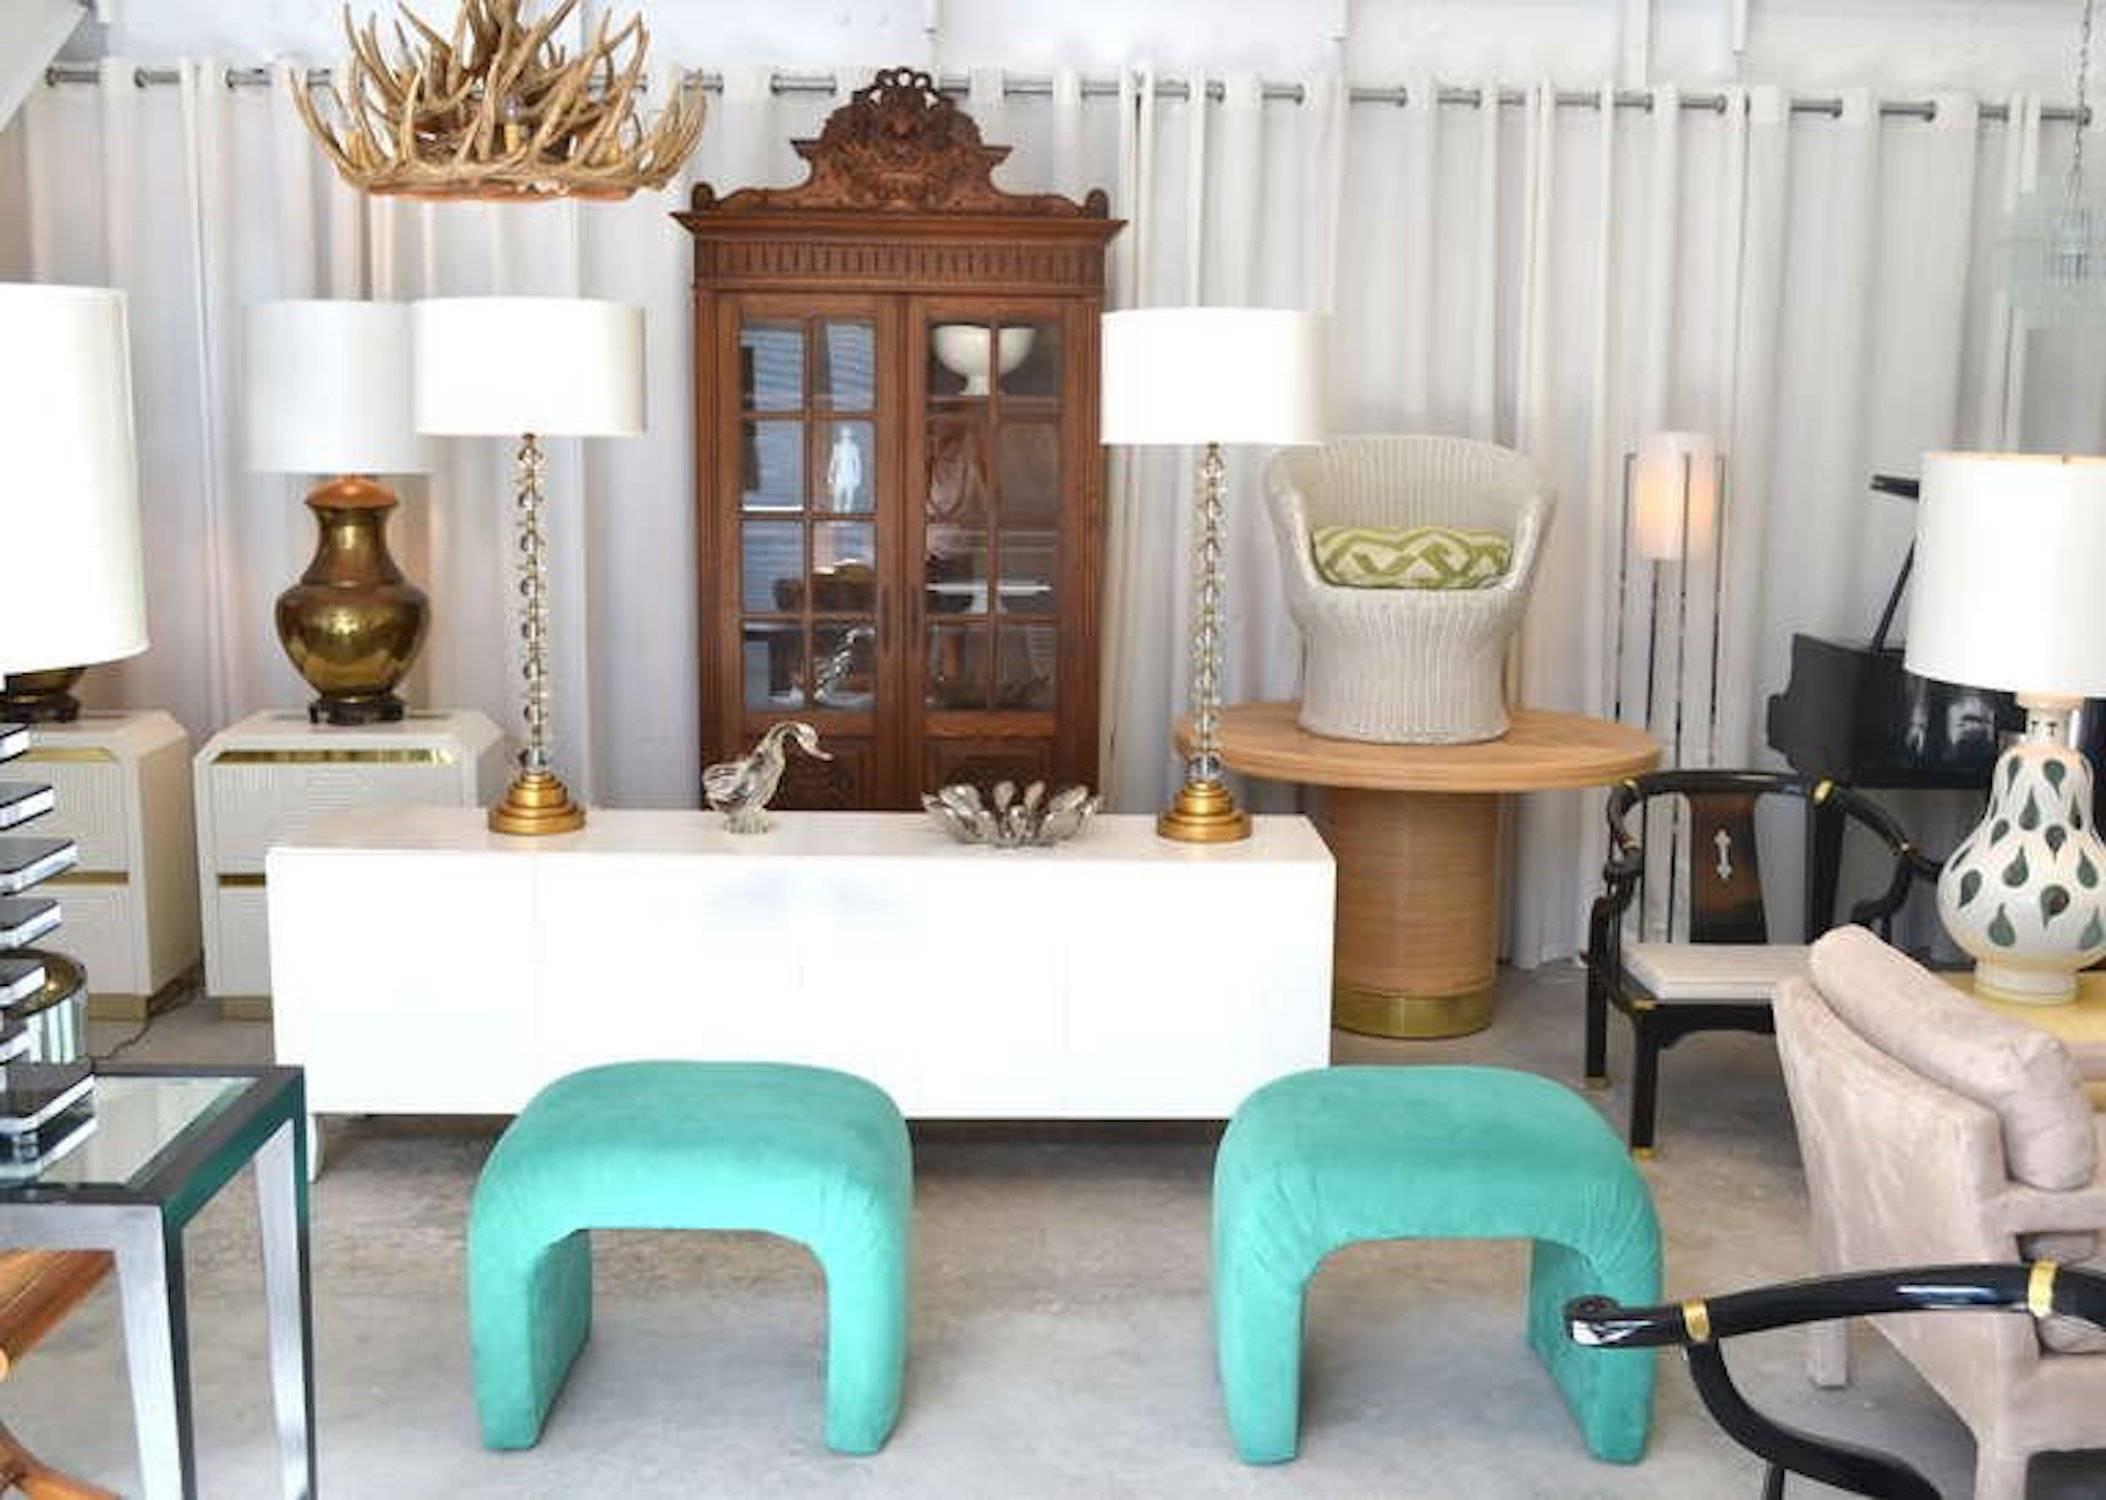 Pair of midcentury upholstered stools or ottomans circa 1970s. These glamorous waterfall edge benches are upholstered in ultra suede.